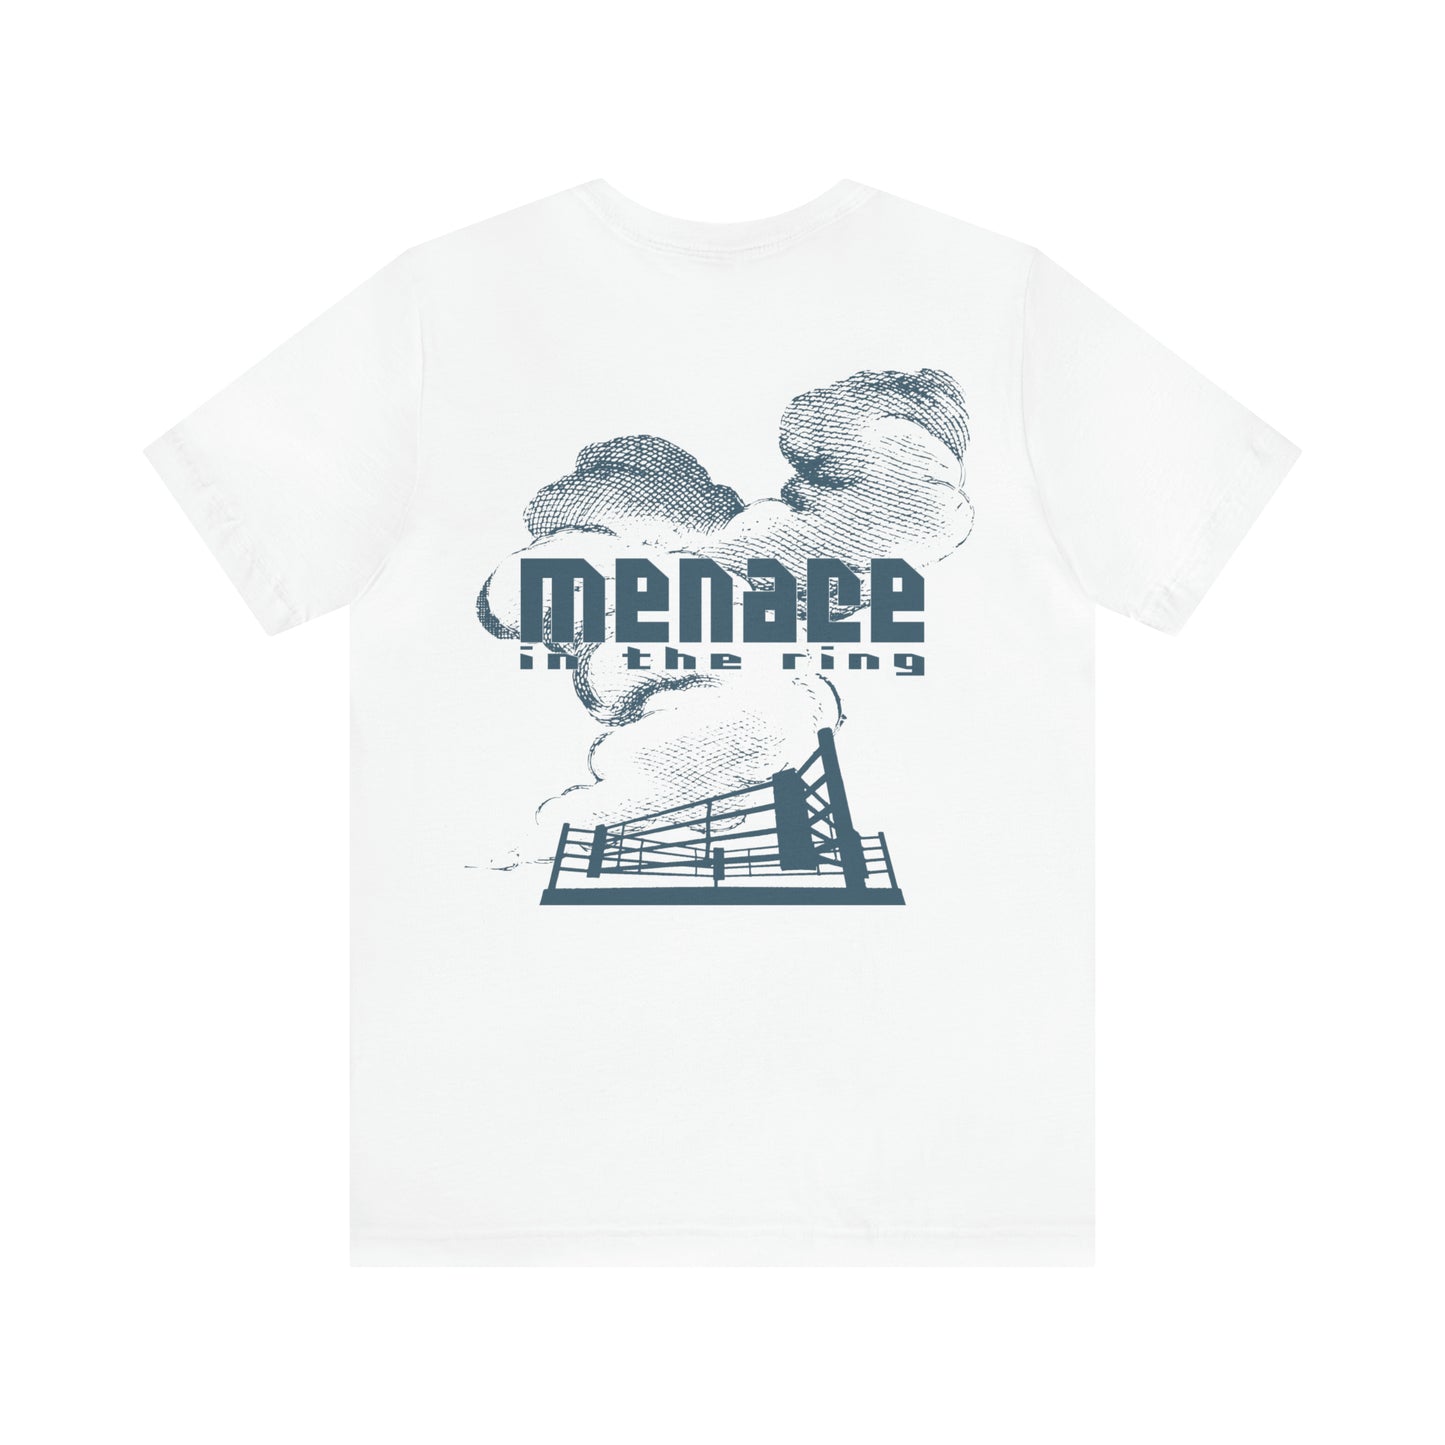 Menace in the Ring Large Back Print, Logo Front Print Tee